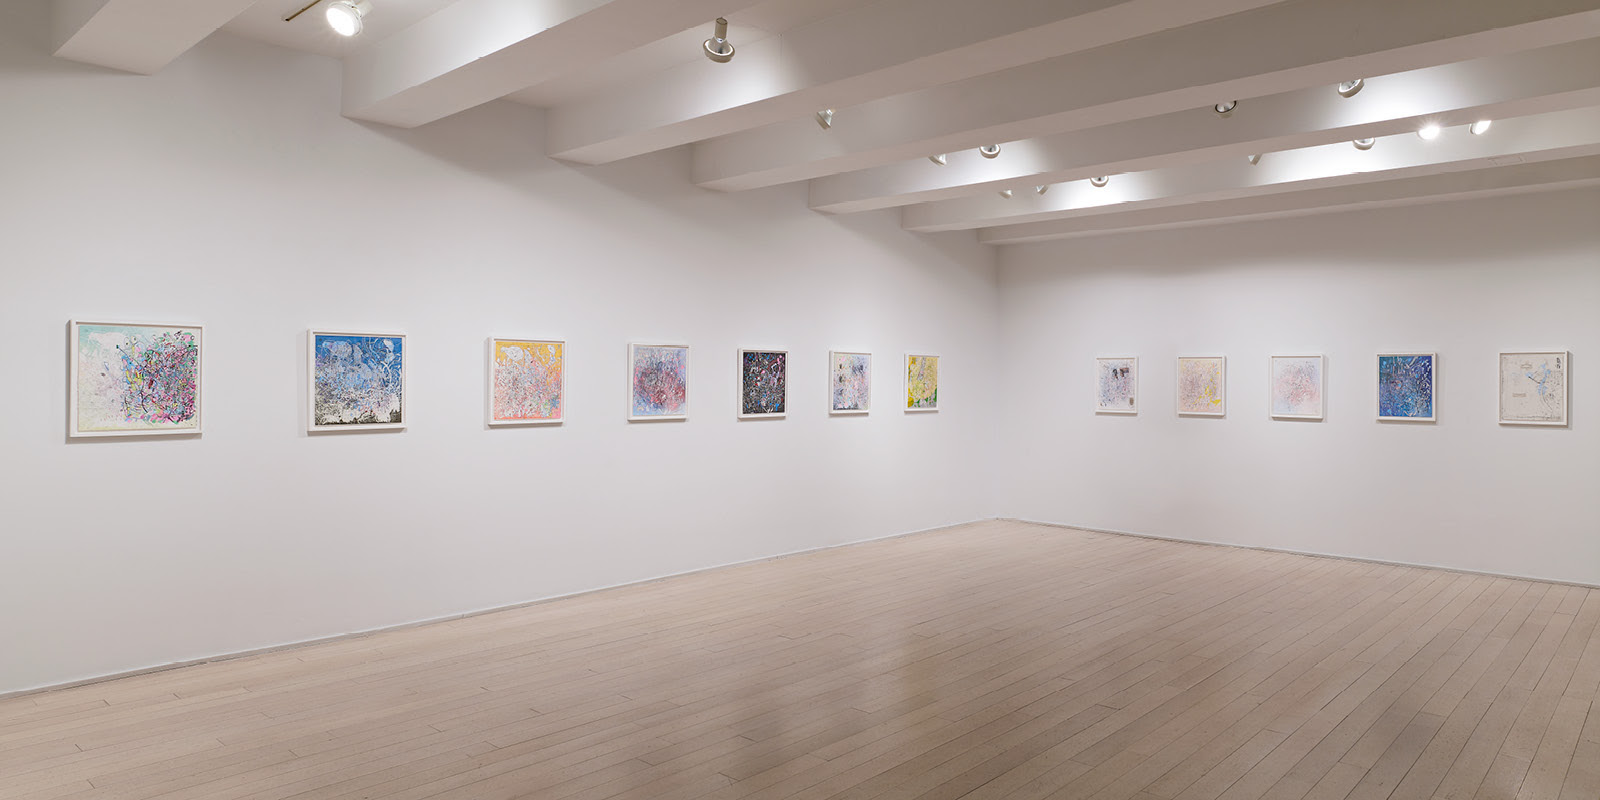 Fine art print installation view of elliot hudley at pace prints